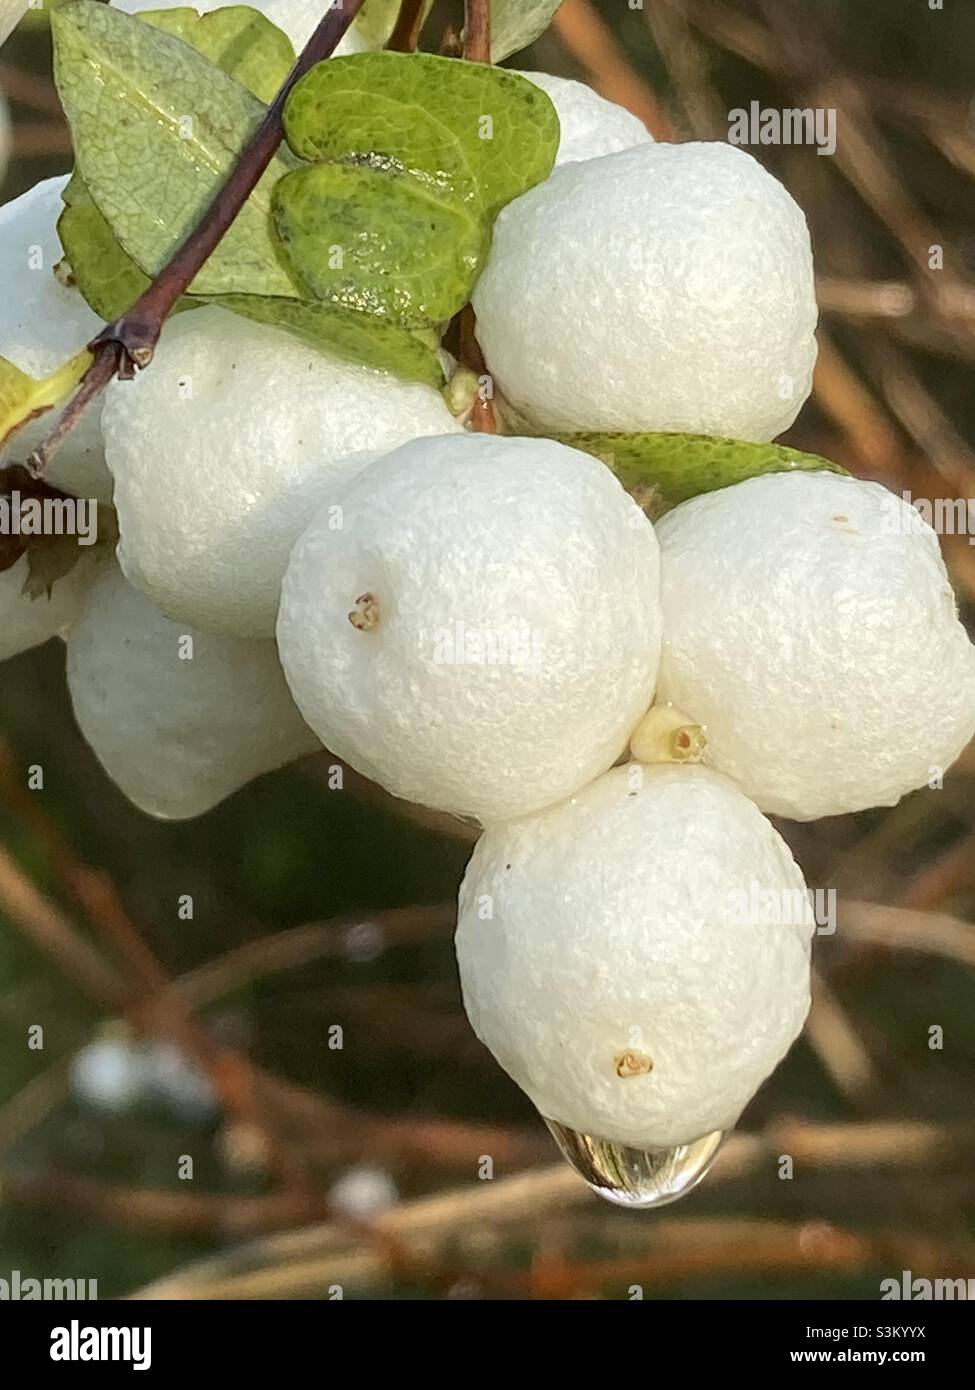 Macro of bunch of Snowberries, Symphoricarpos. Sometimes called Ghostberries. Brilliant white skins in this image resembling texture of oranges. Raindrops visible. Gooderstone, Norfolk Dec 2021 Stock Photo